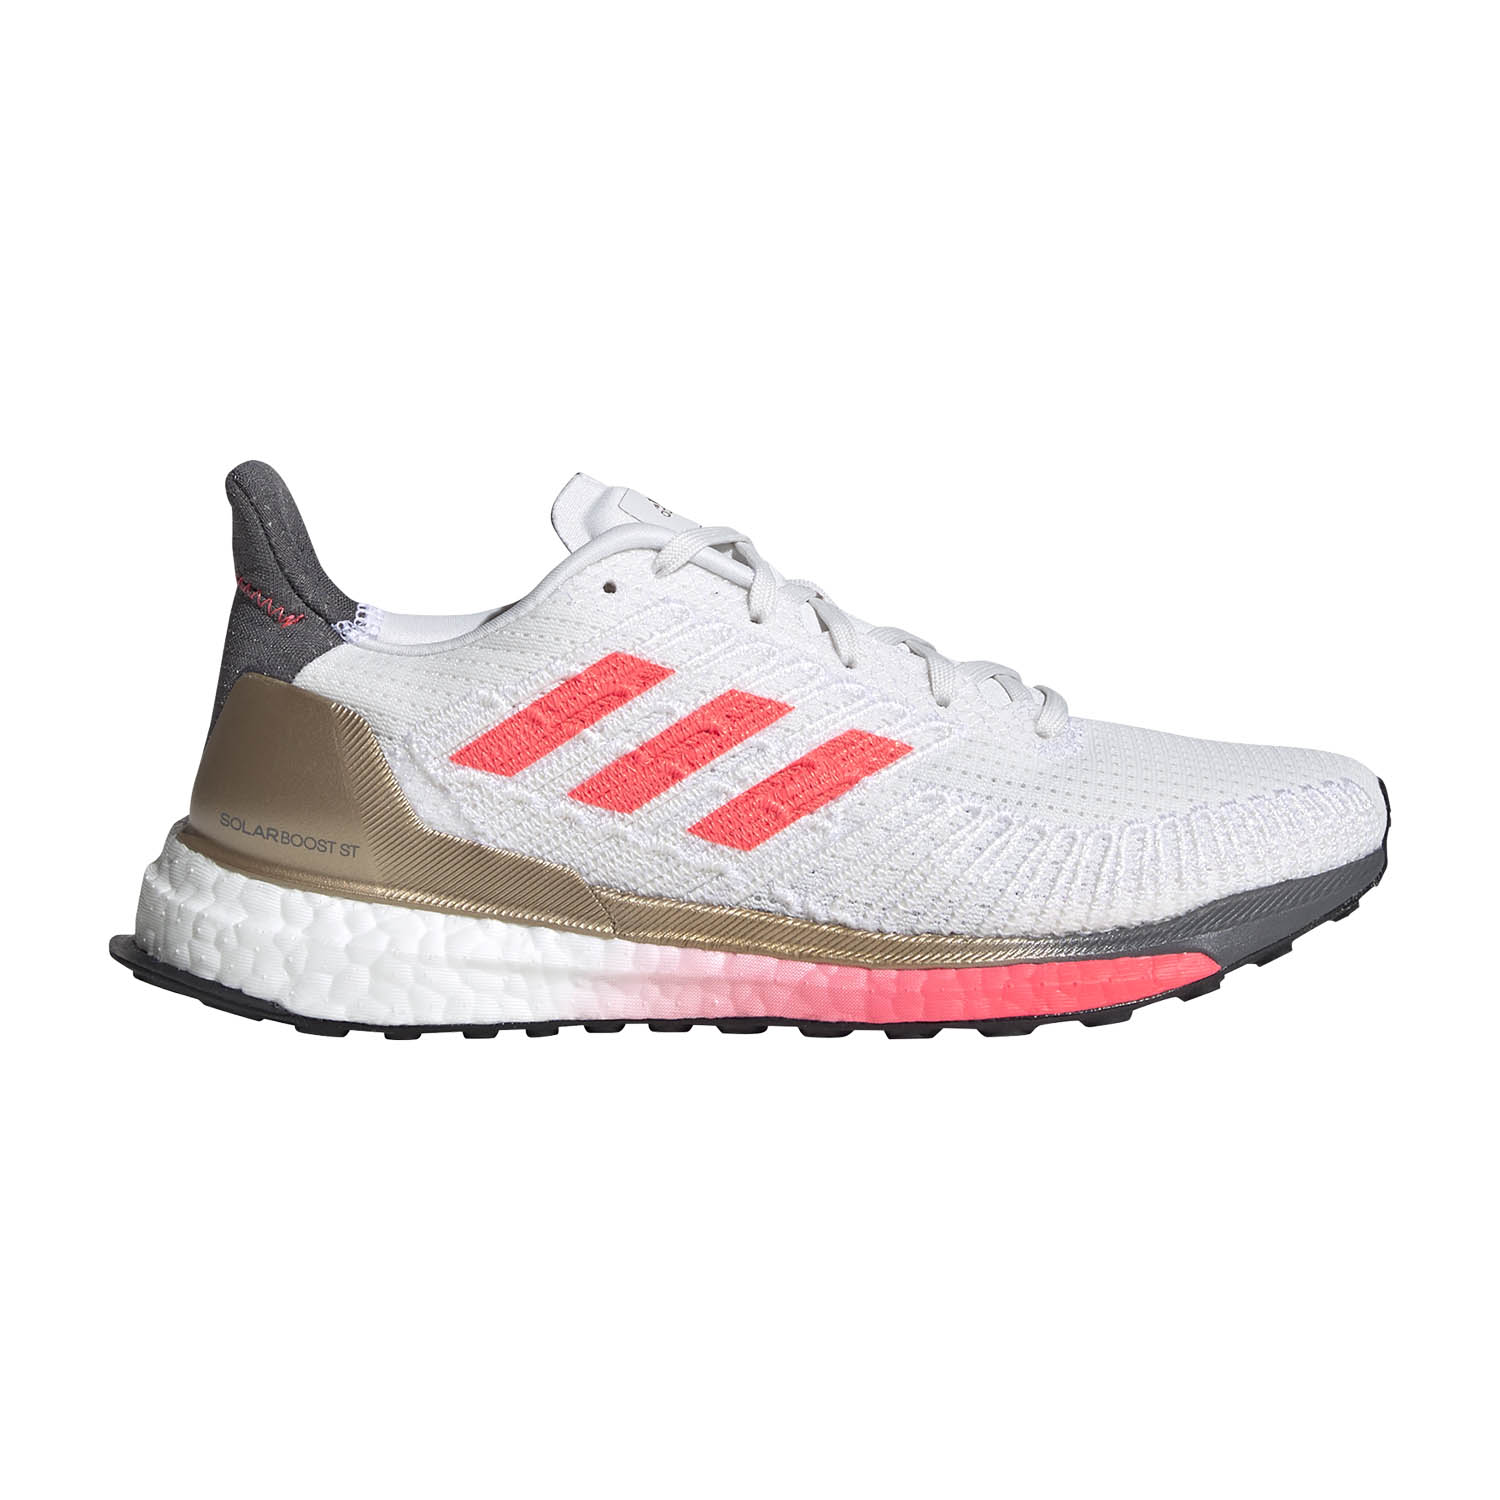 Adidas Solar Boost Stability Flash Sales, UP TO 55% OFF | www ... نيمبوز